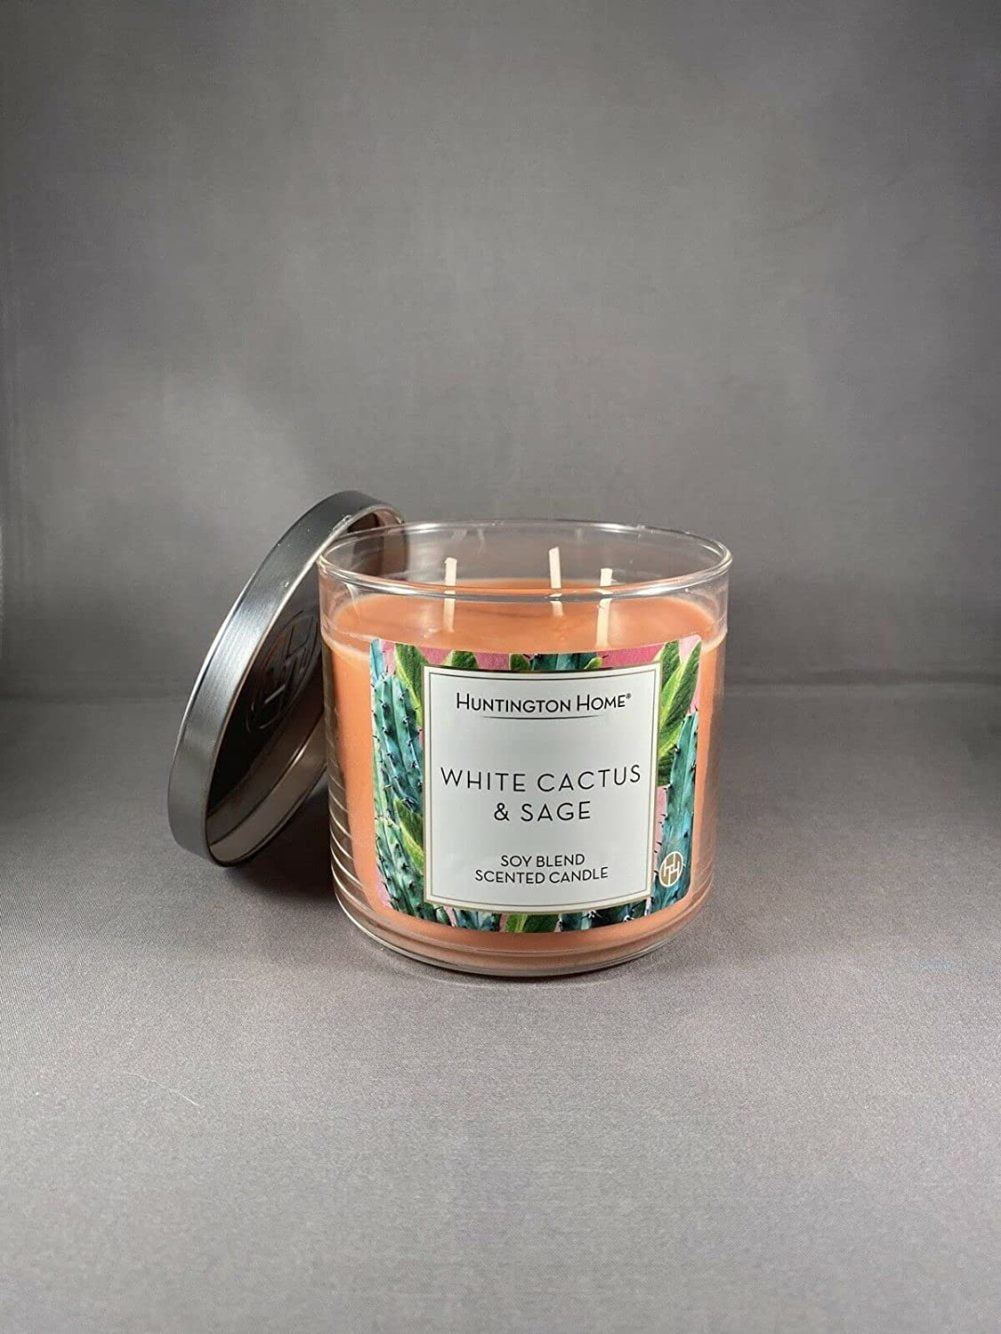 Huntington Home Soy Blend Scented Candle All Scented 3 Wicks 4560 Hours  (White Cactus & Sage)) - Walmart.com